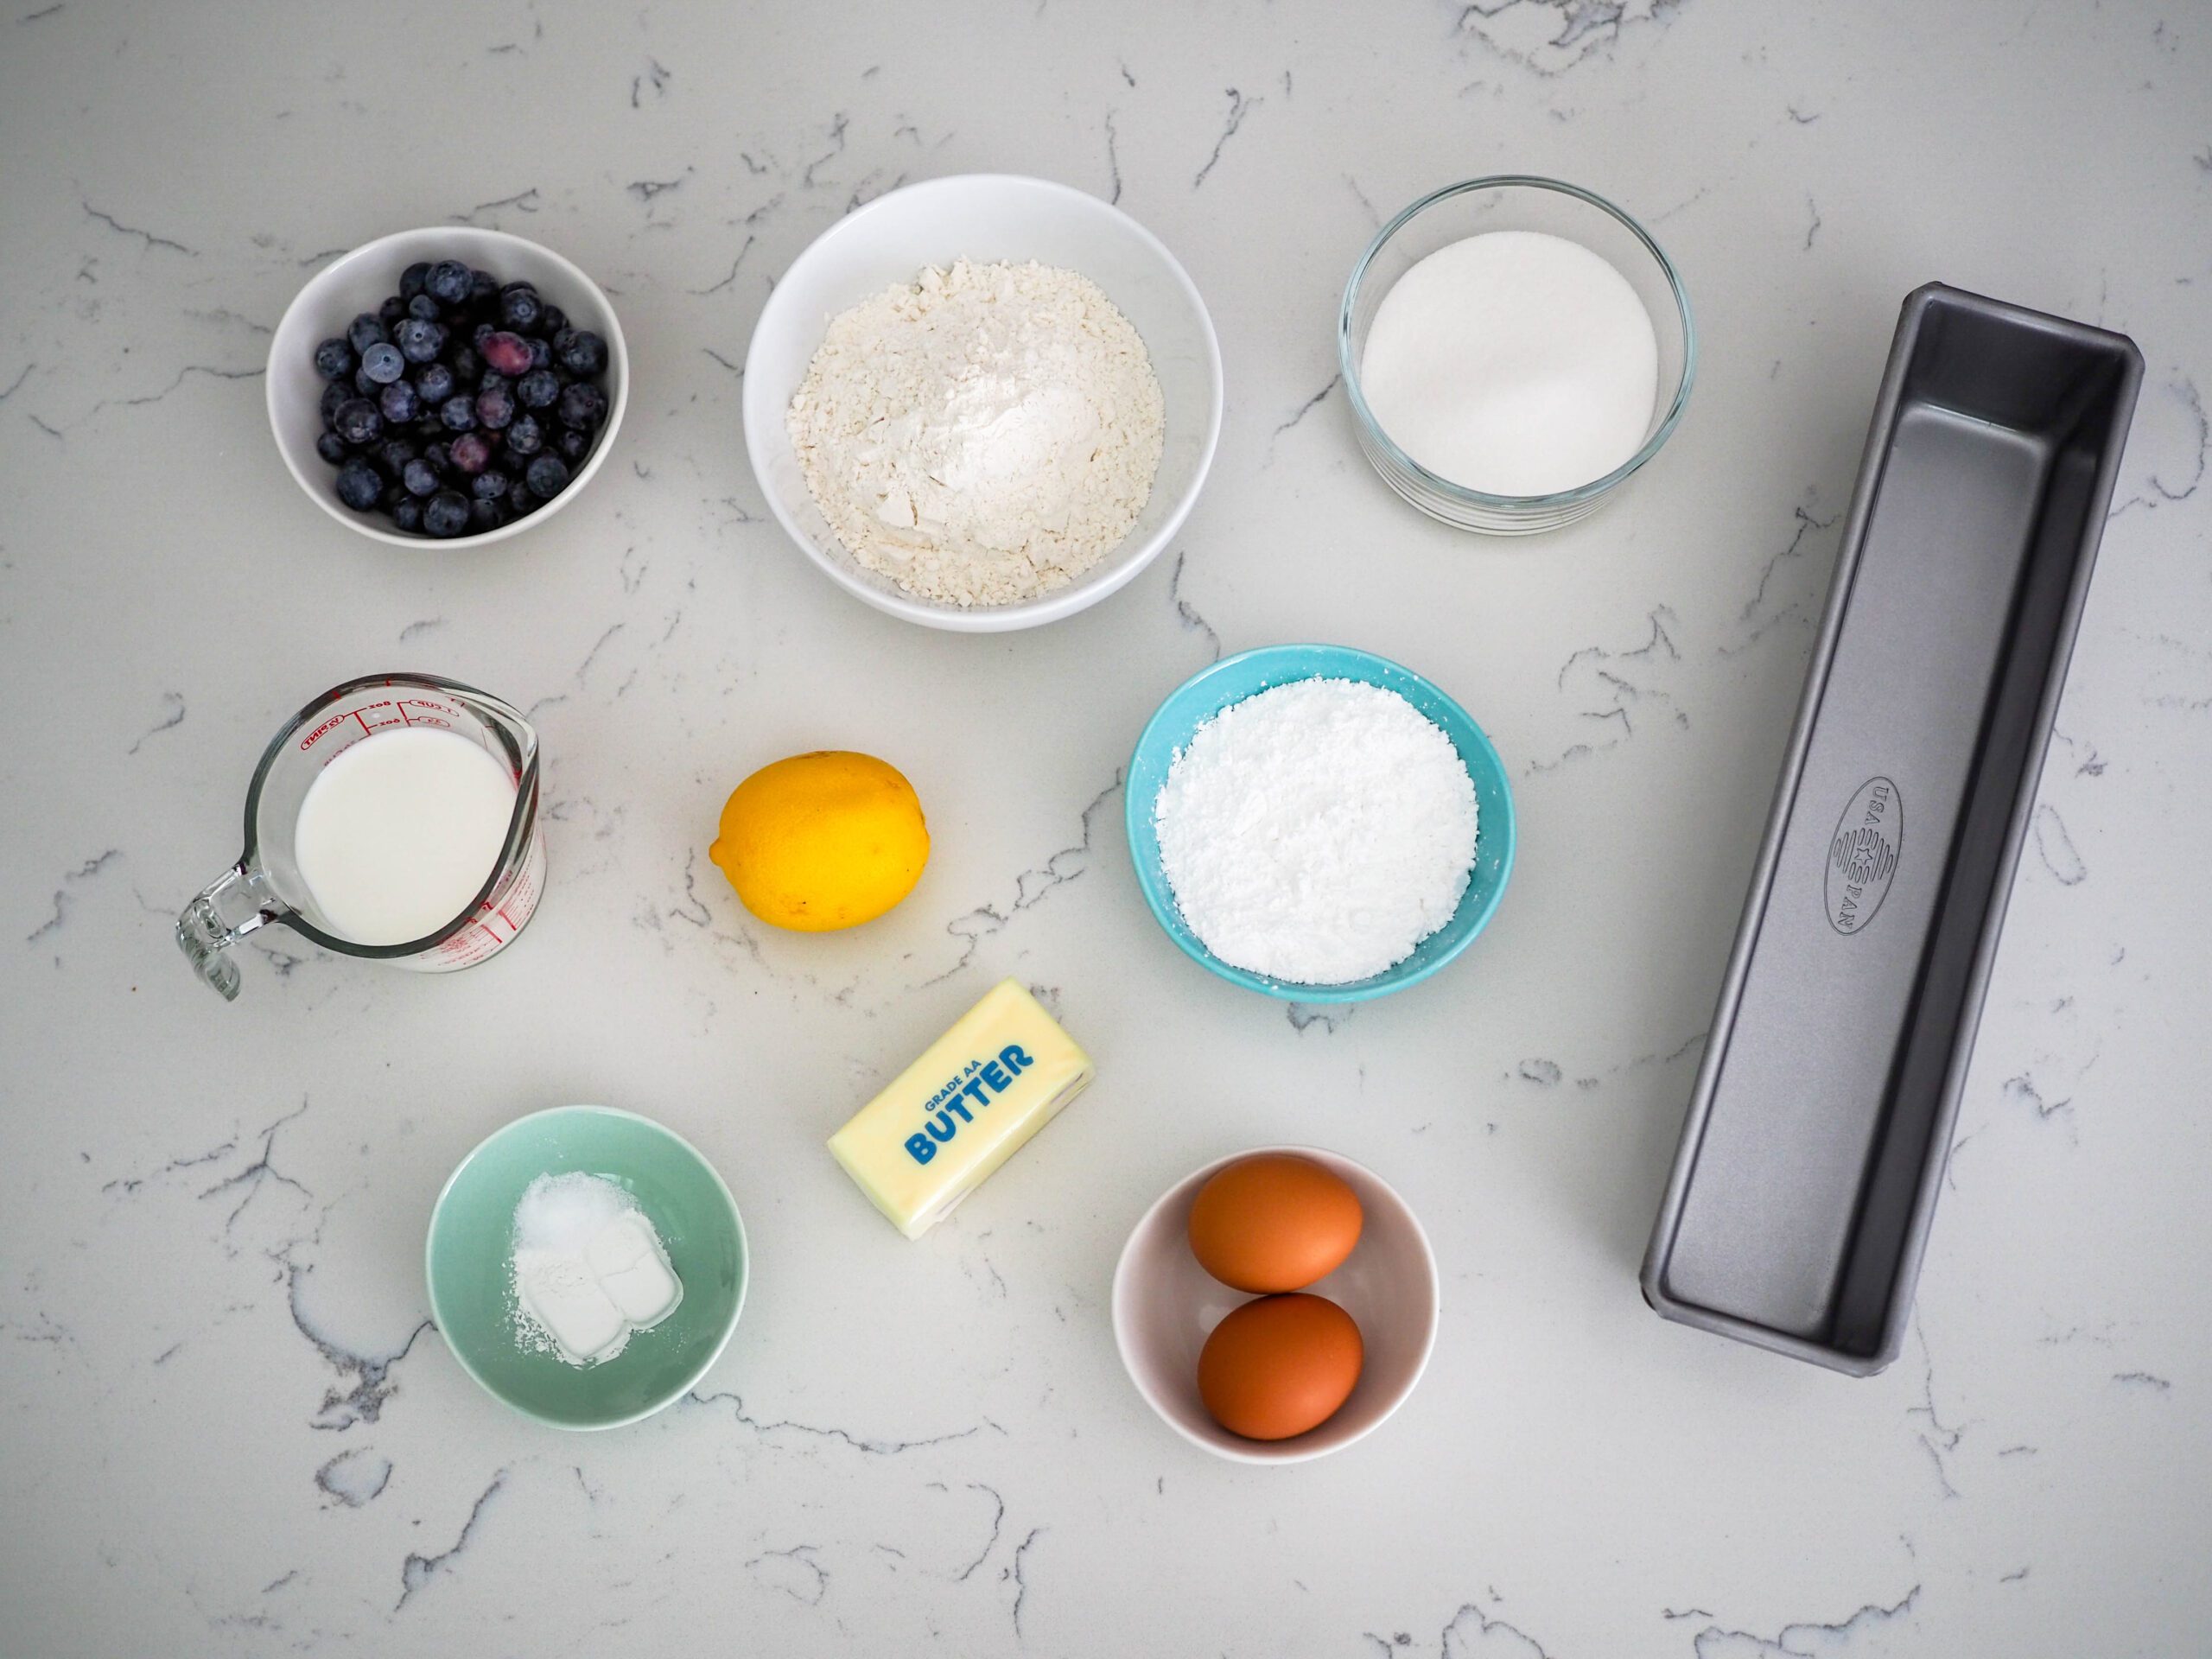 A collection of ingredients arranged on a quartz countertop, with a cocktail loaf pan on the right.